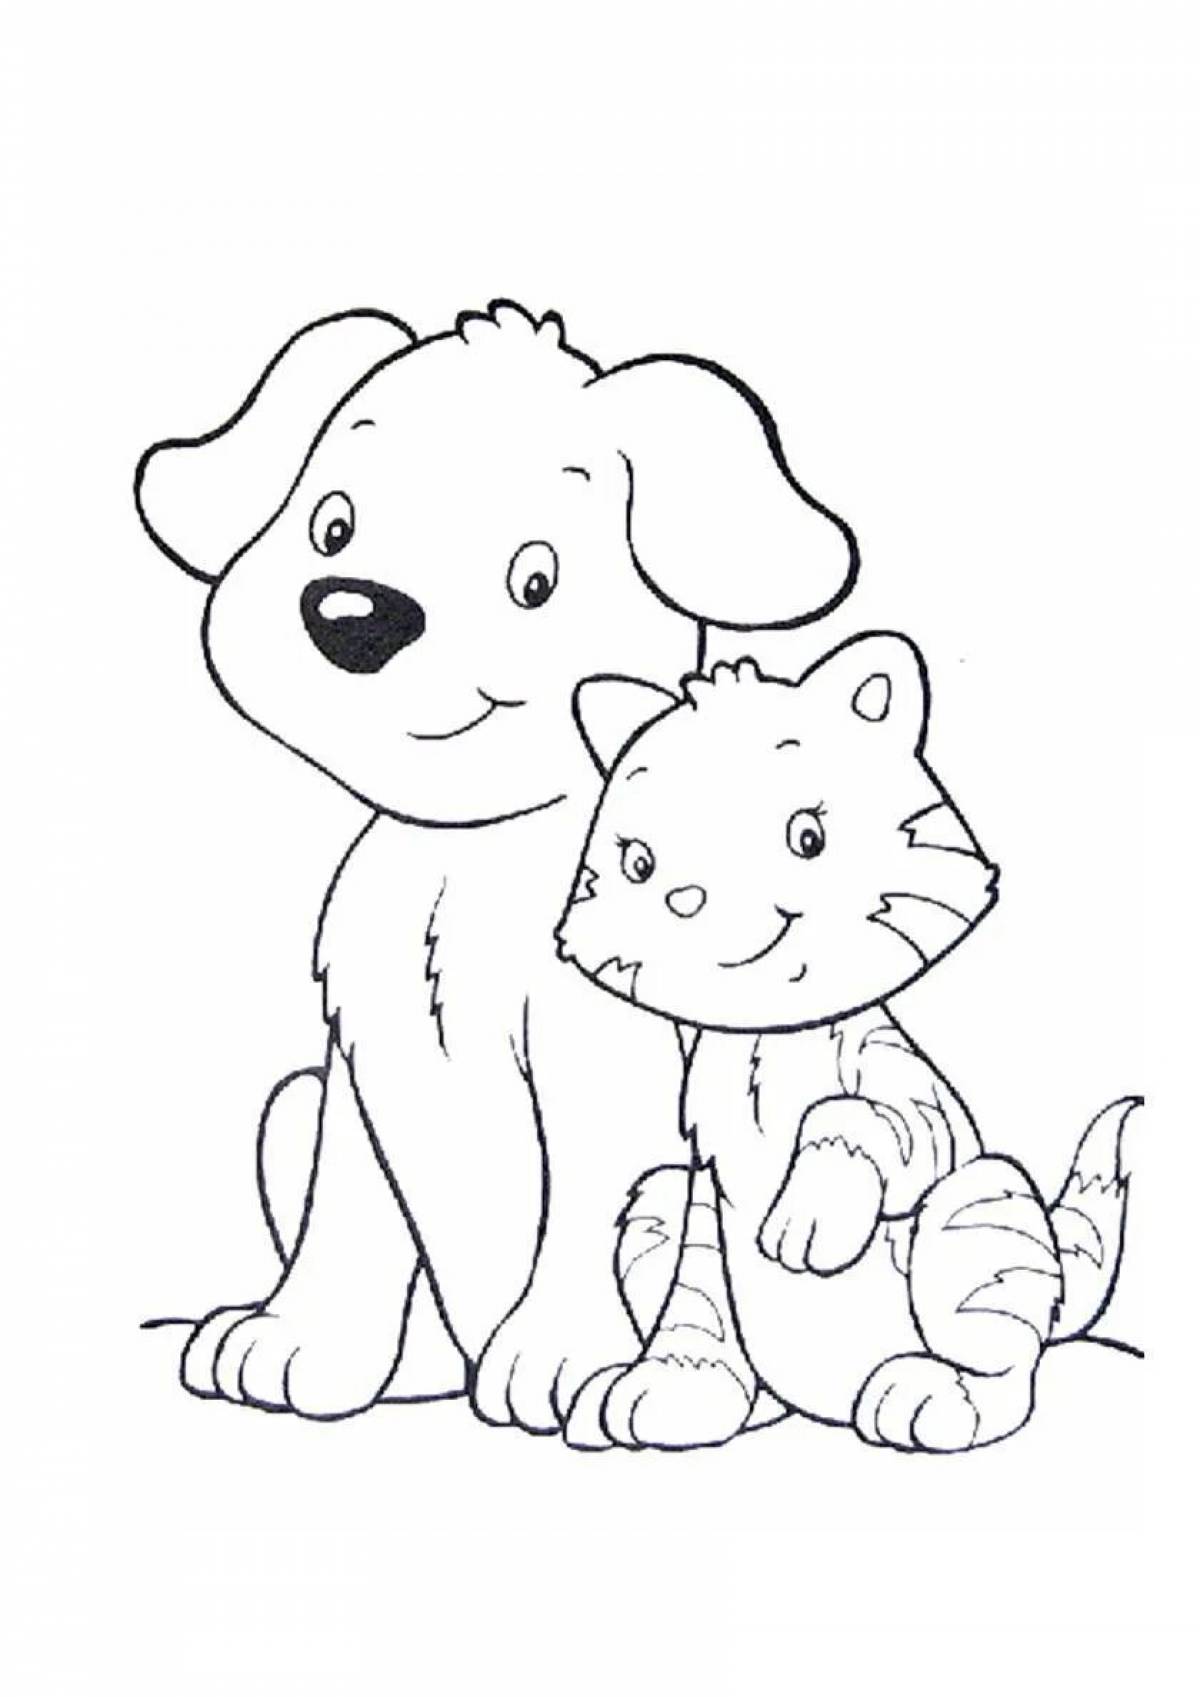 Cat and dog coloring book for kids